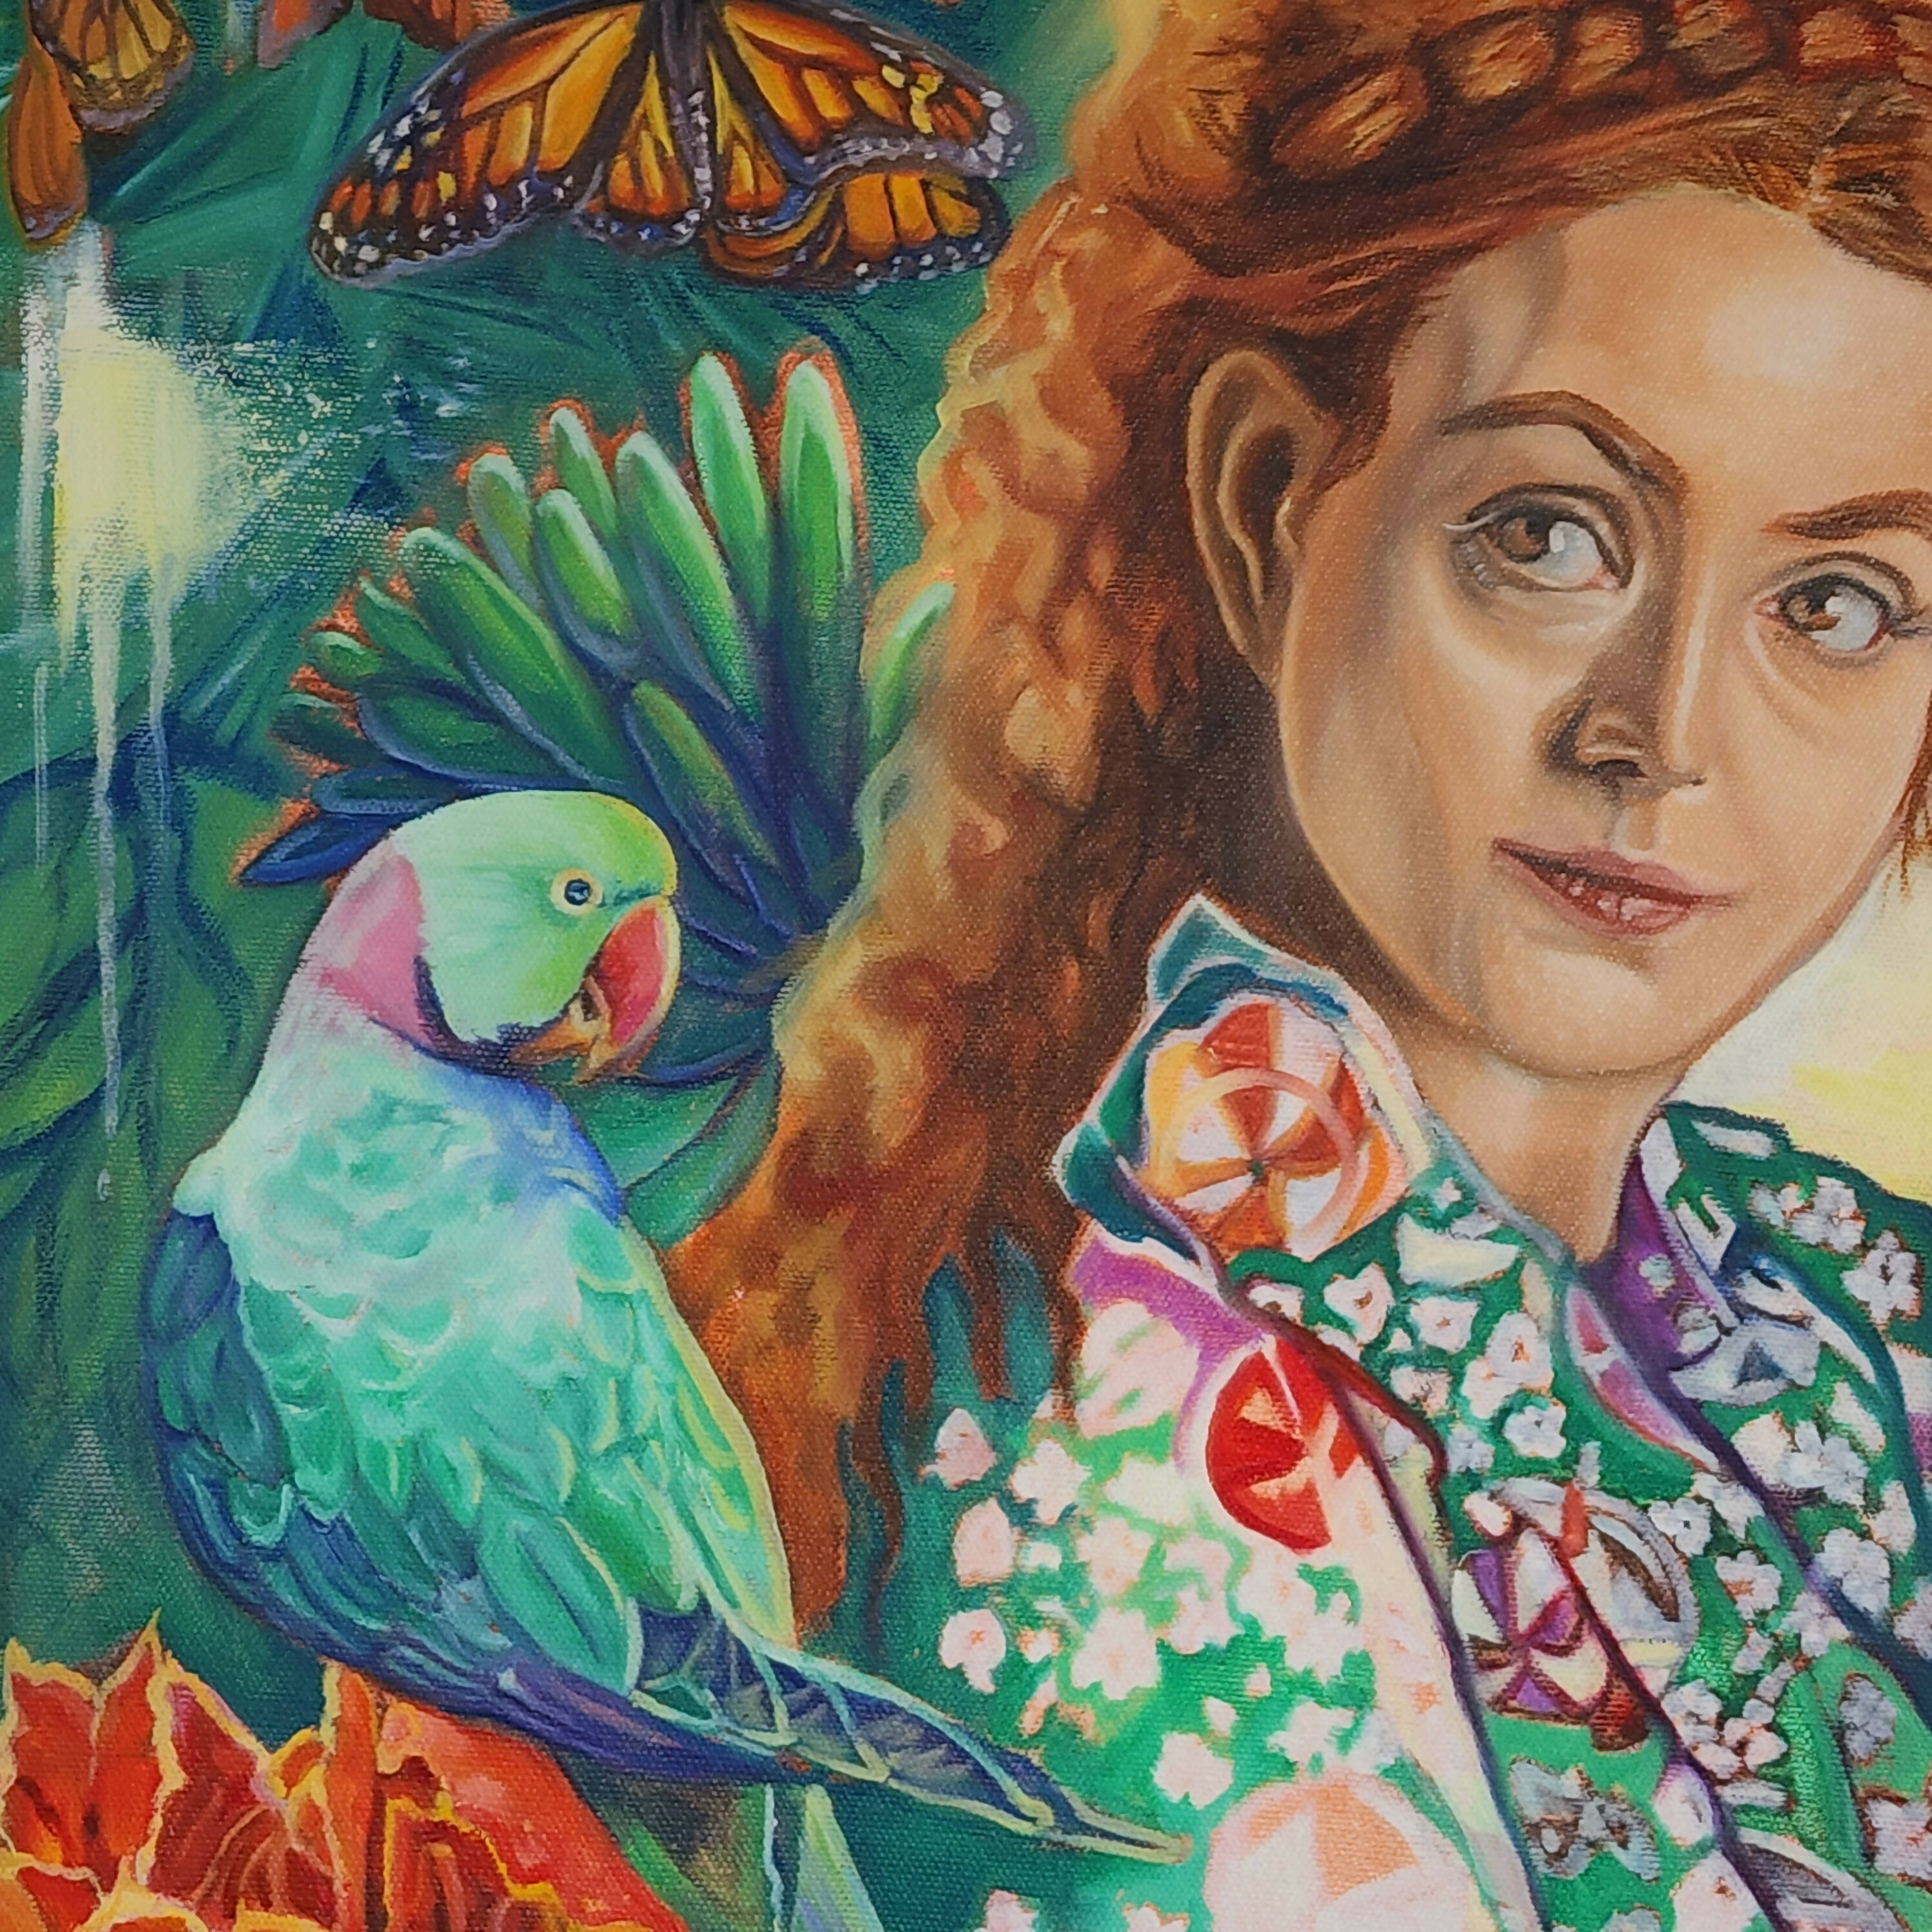 "Woman with Parrots "